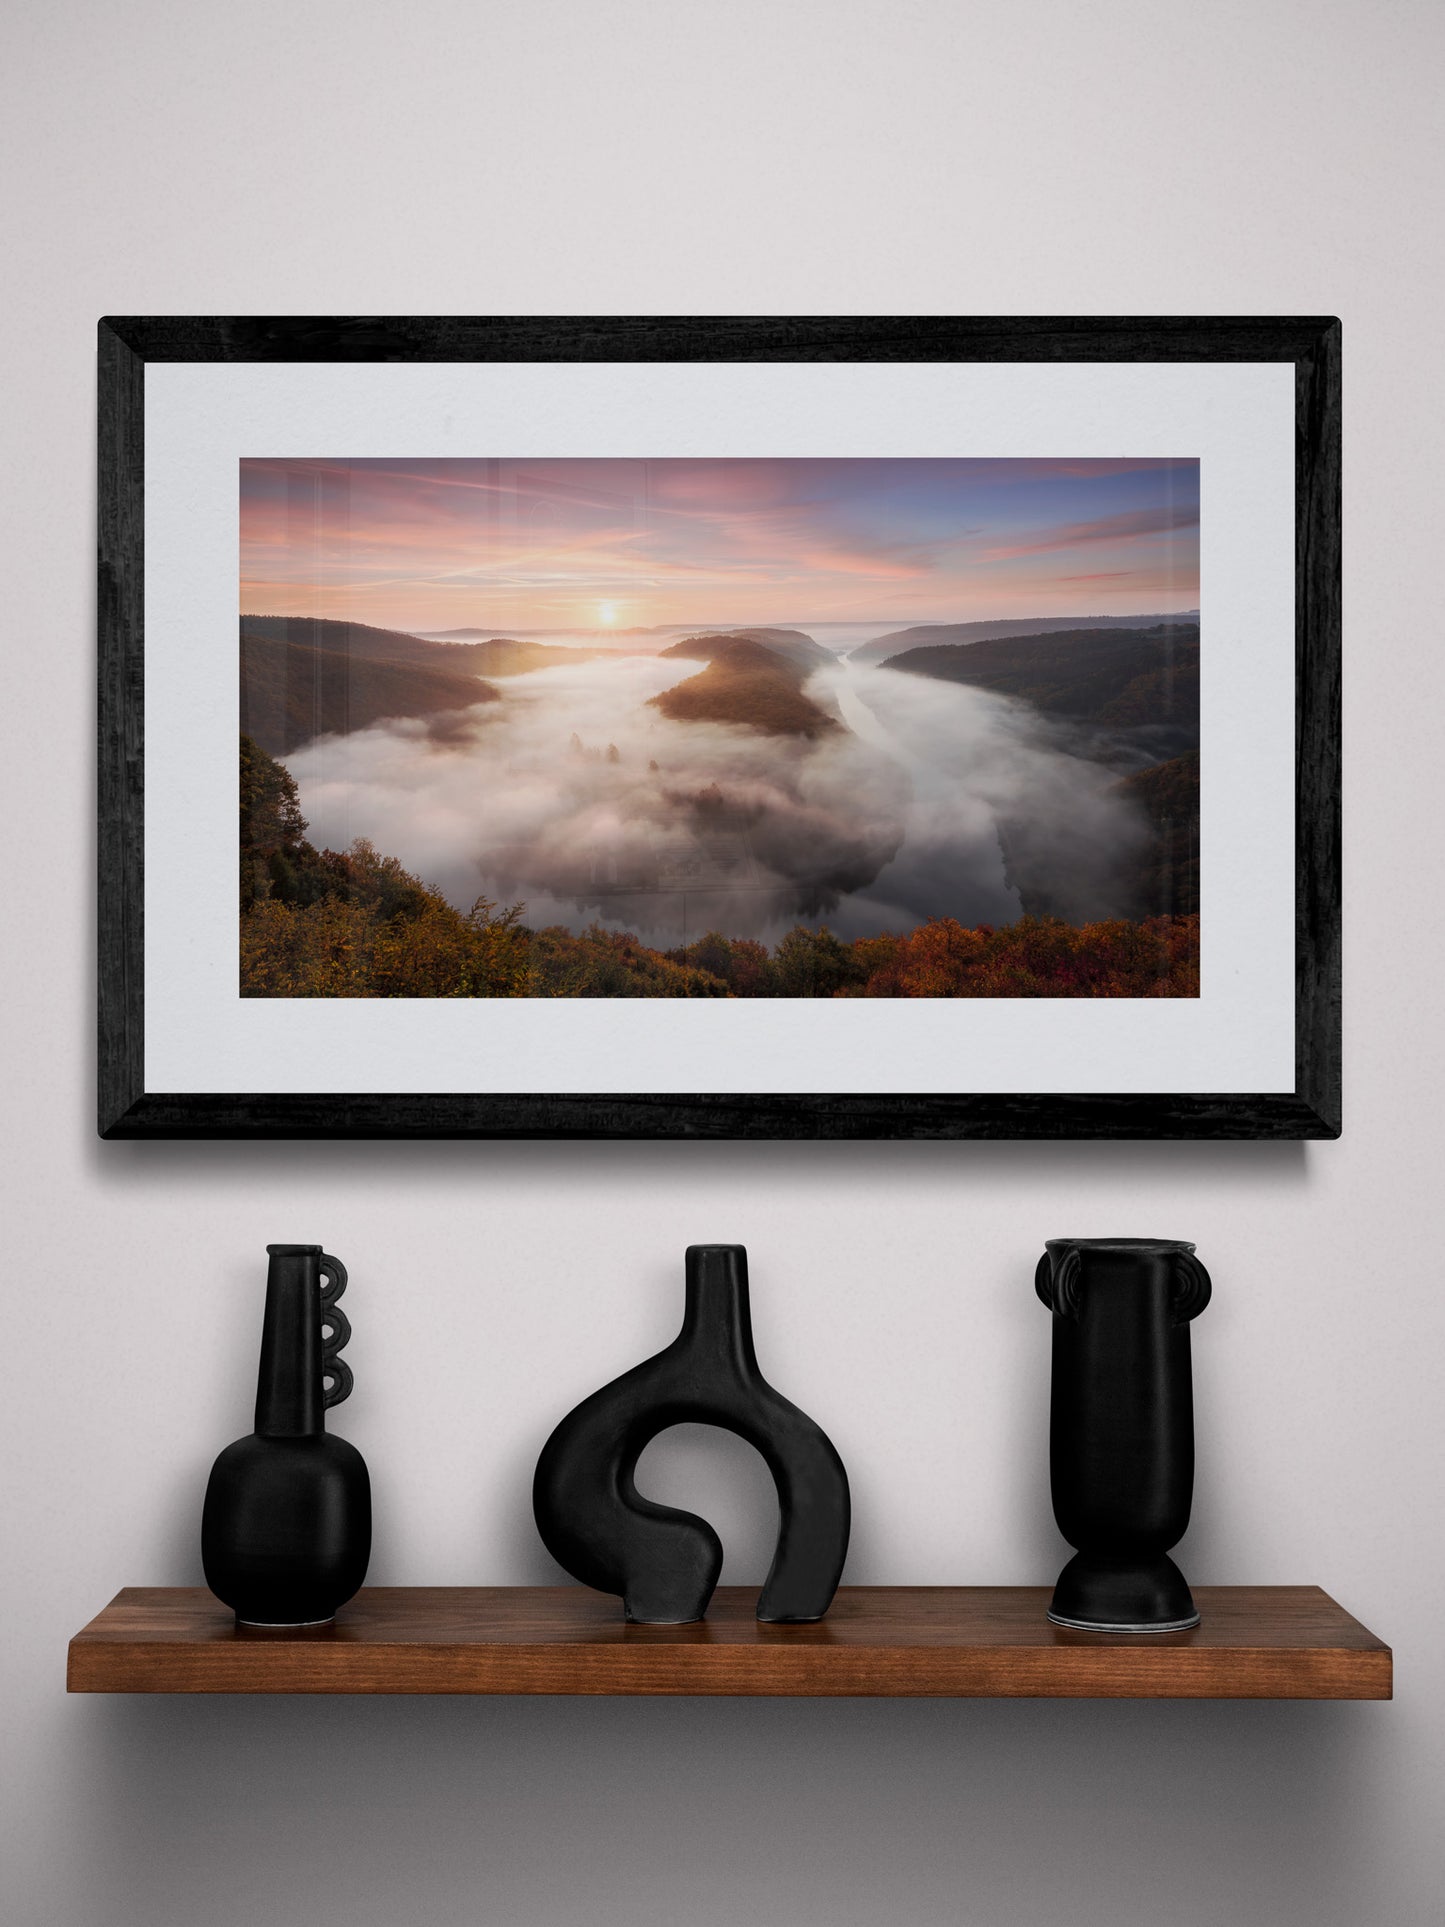 Image Title: The foggy Loop Photographer: Marcus Danz Location: Mettlach, Germany Image description: Mysterious morning fog drifts silently through Mettlach’s Saar loop, partly lit by the warm light of the rising sun. High quality Fine Art print up to 36 inch / around 90 centimeters on Hahnemühle paper available. Small variant over shelf.